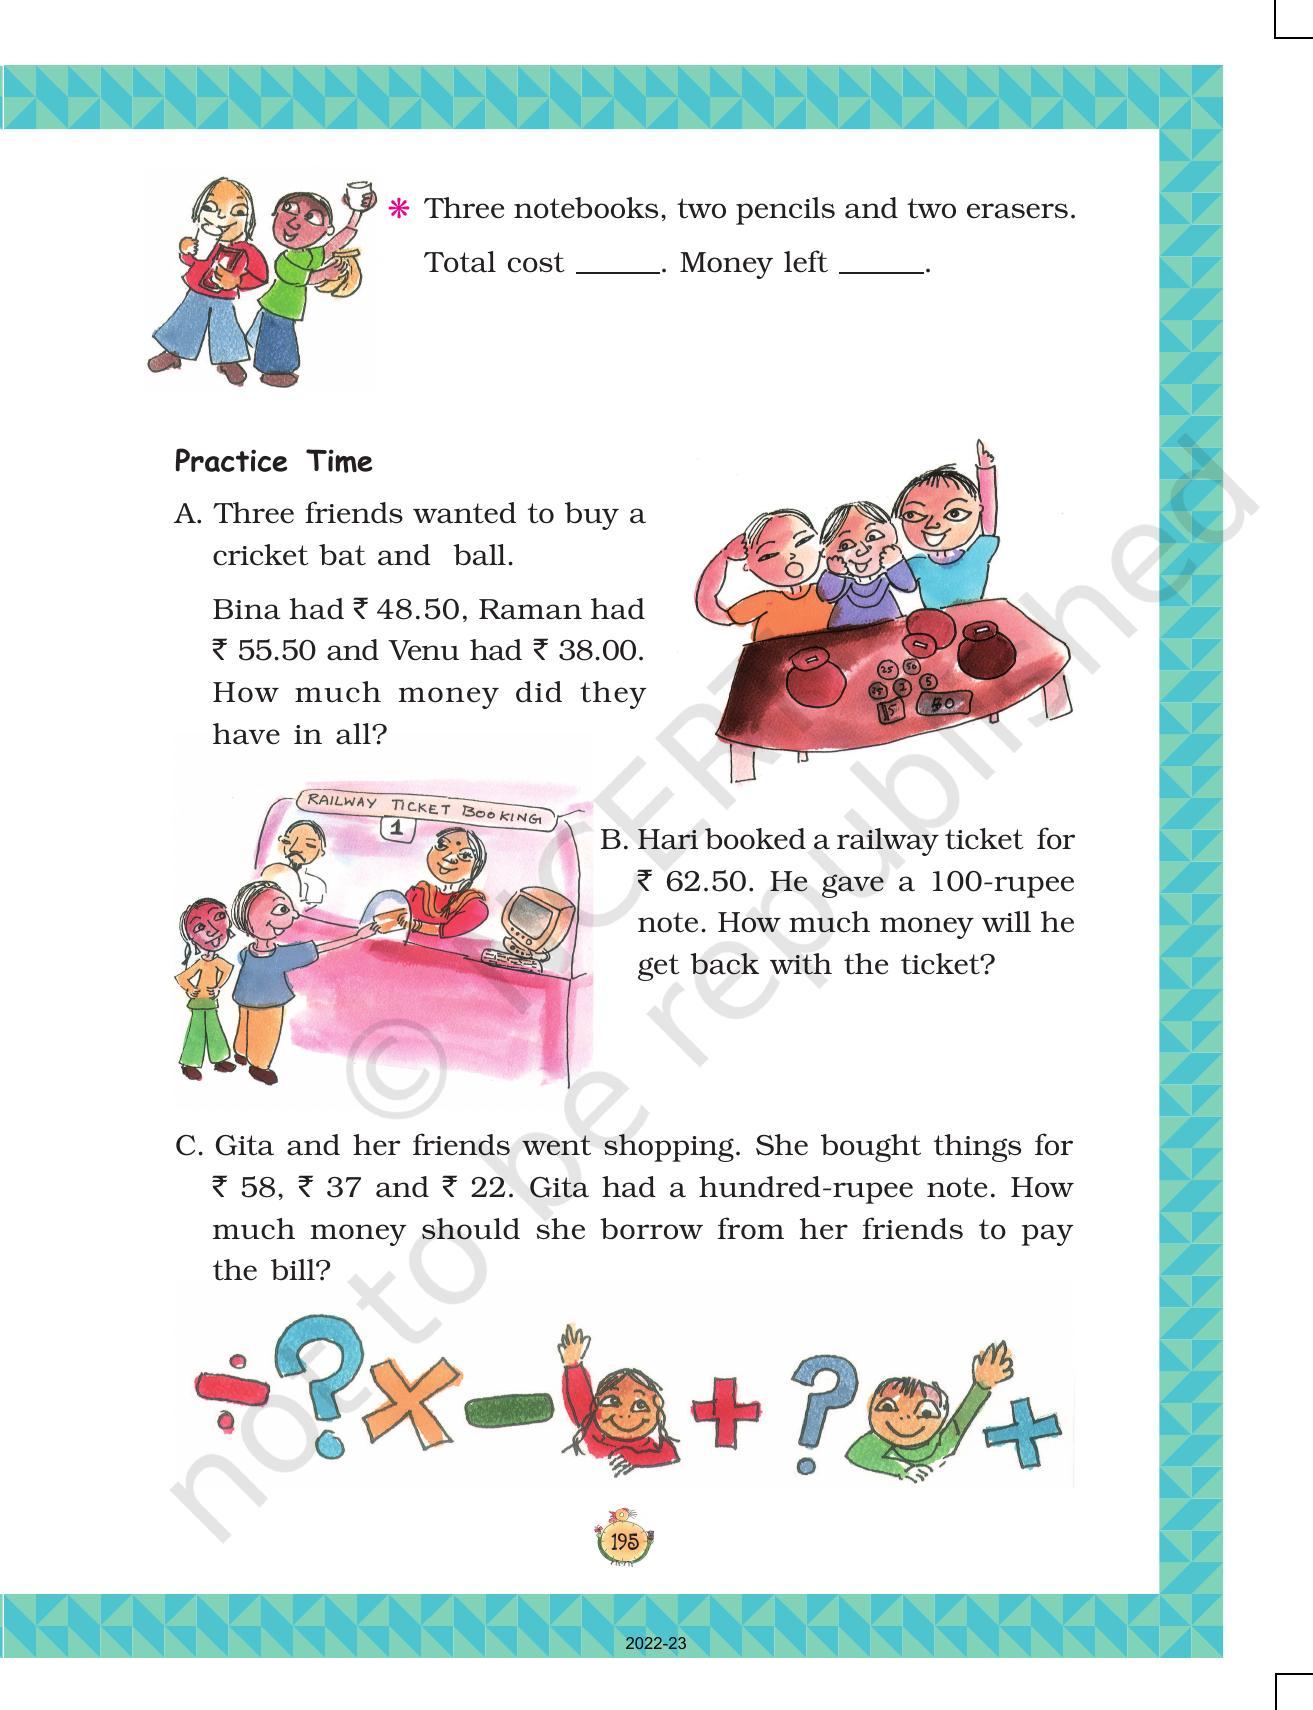 NCERT Book for Class 3 Maths Chapter 14-Rupees and Paise - Page 8